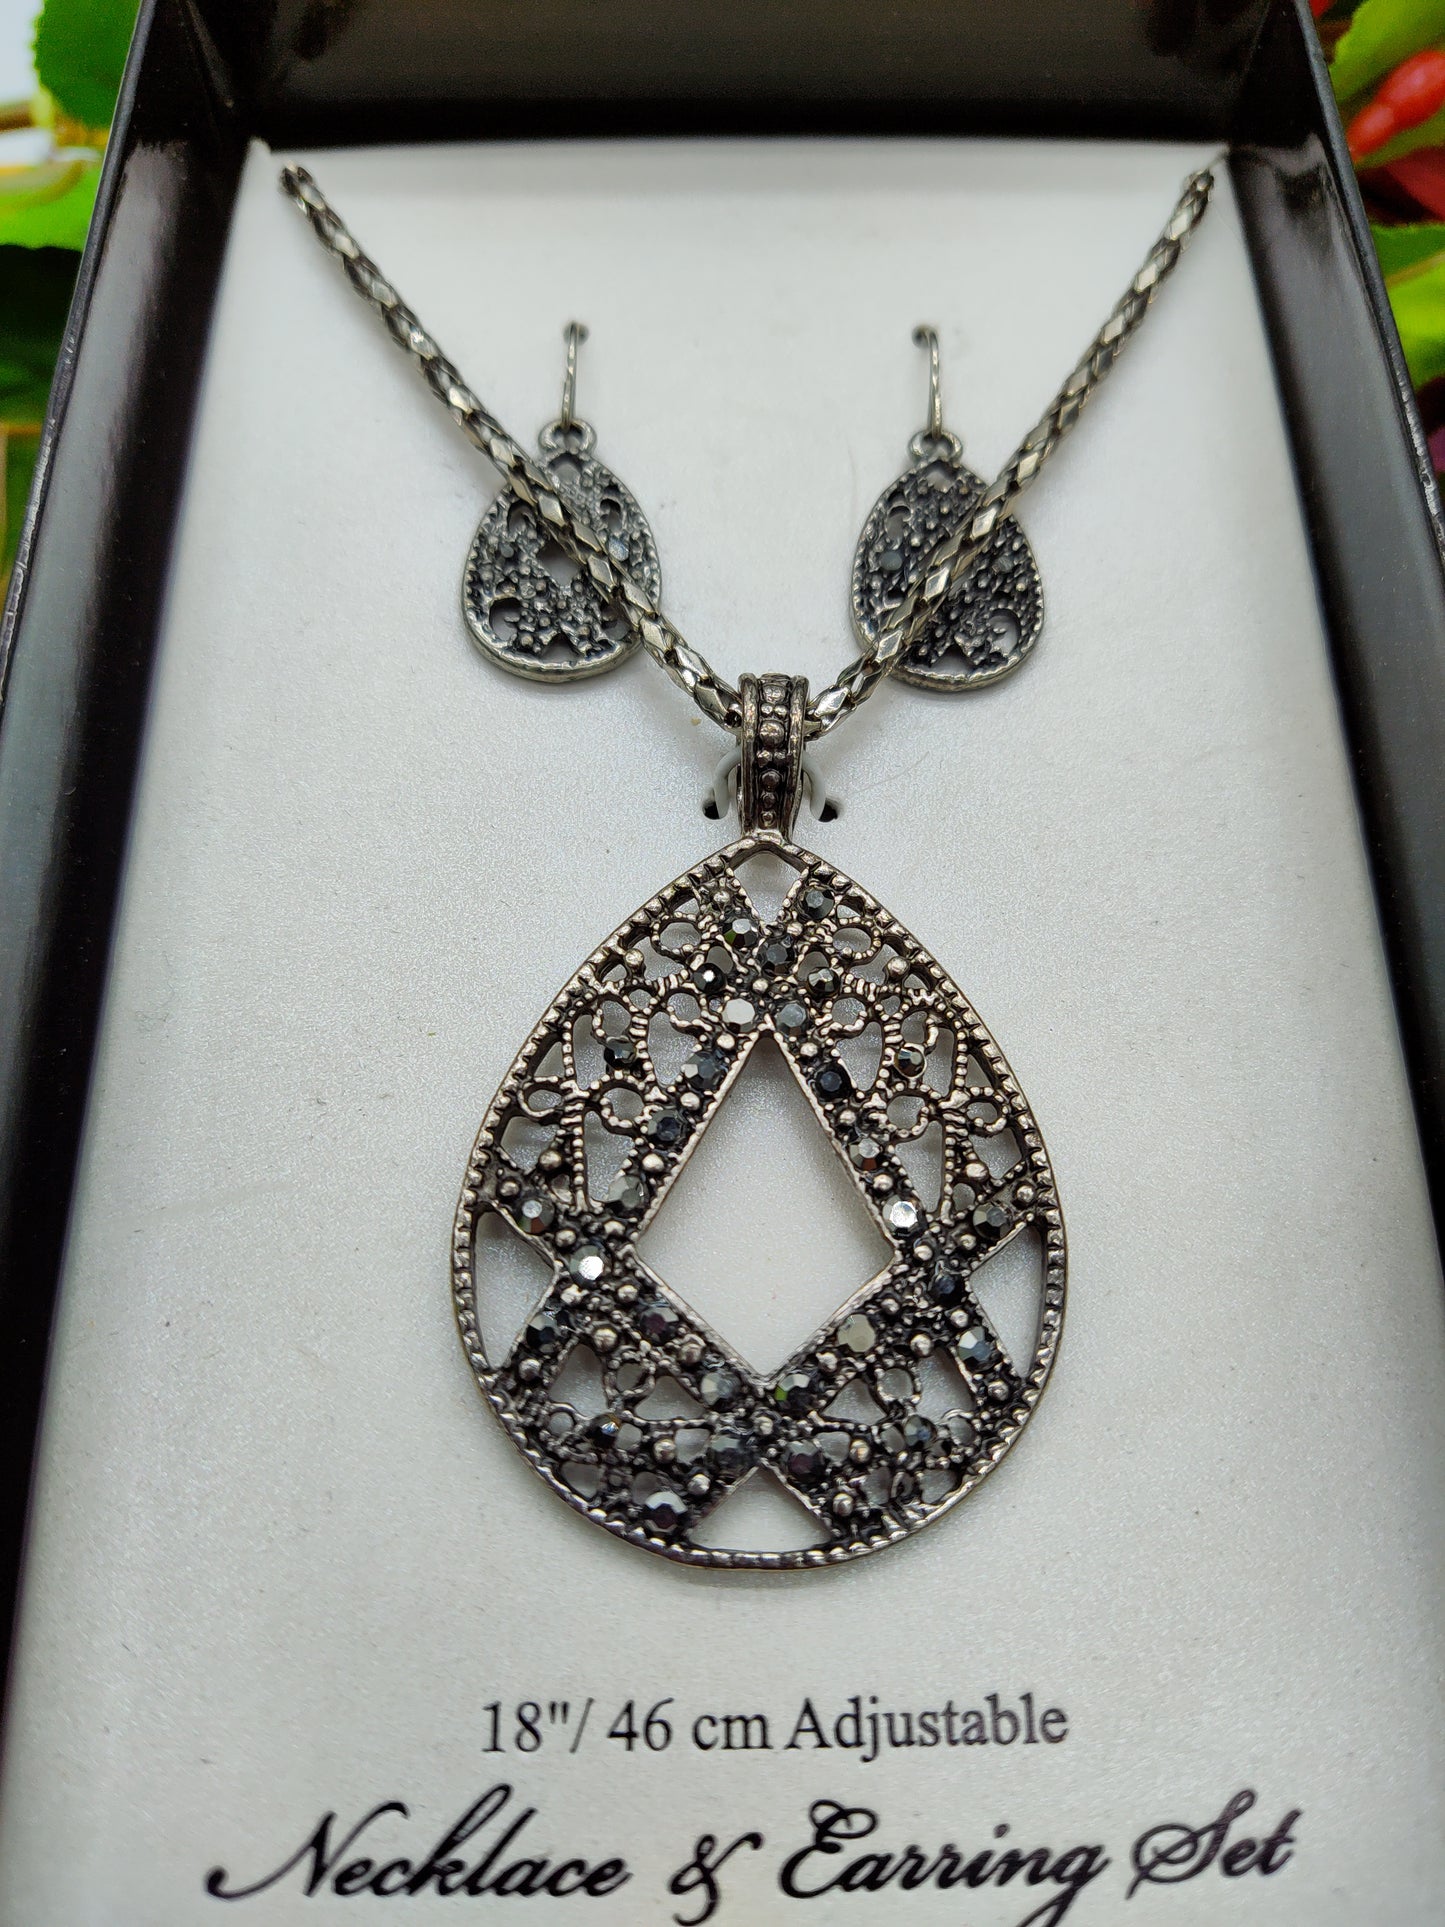 Teardrop Pendant Necklace and Earring Set